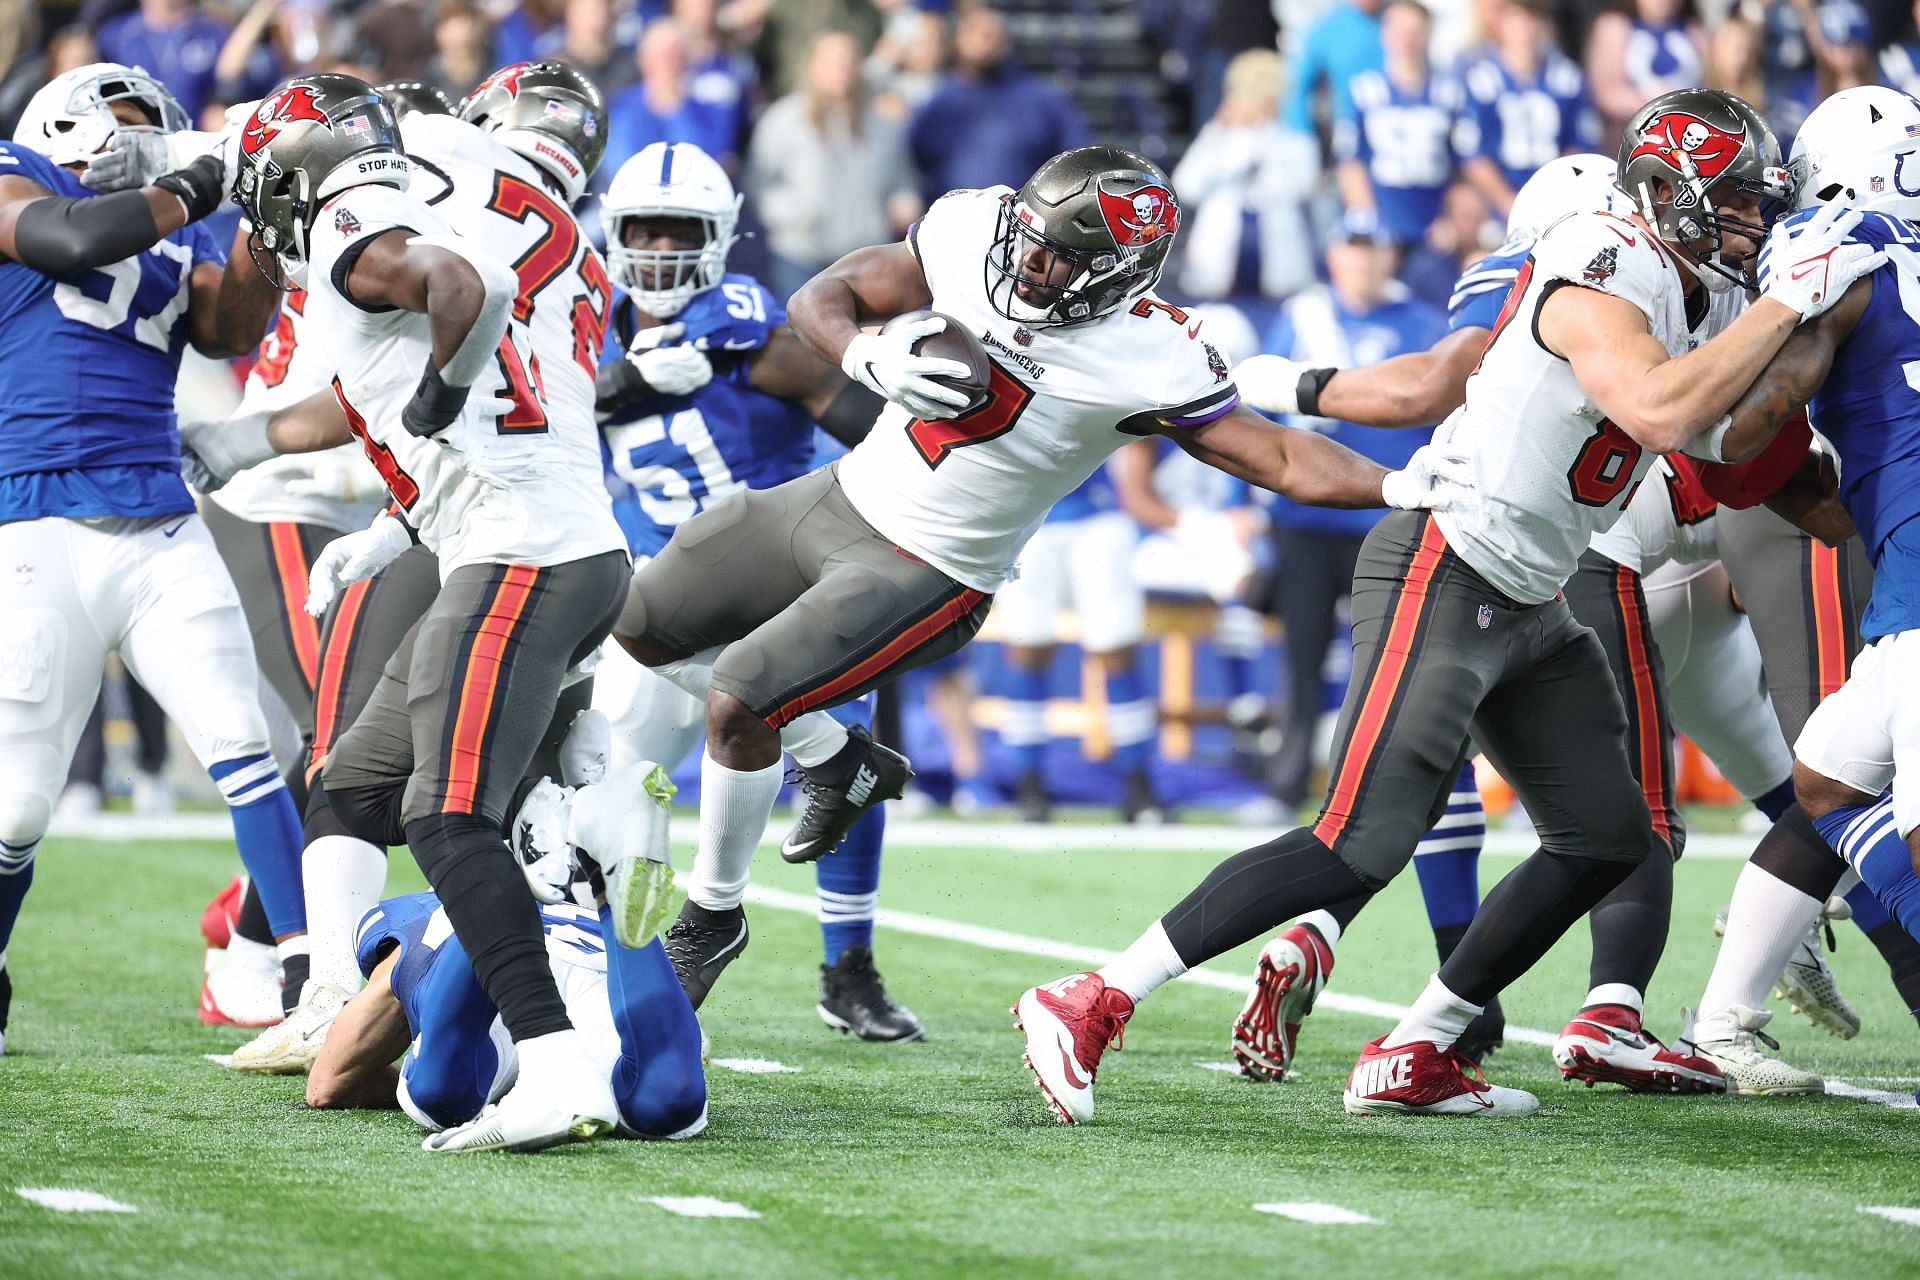 Leonard Fournette (with ball) helped the Bucs regain their NFC composure with a win over the Colts (Photo: Getty)